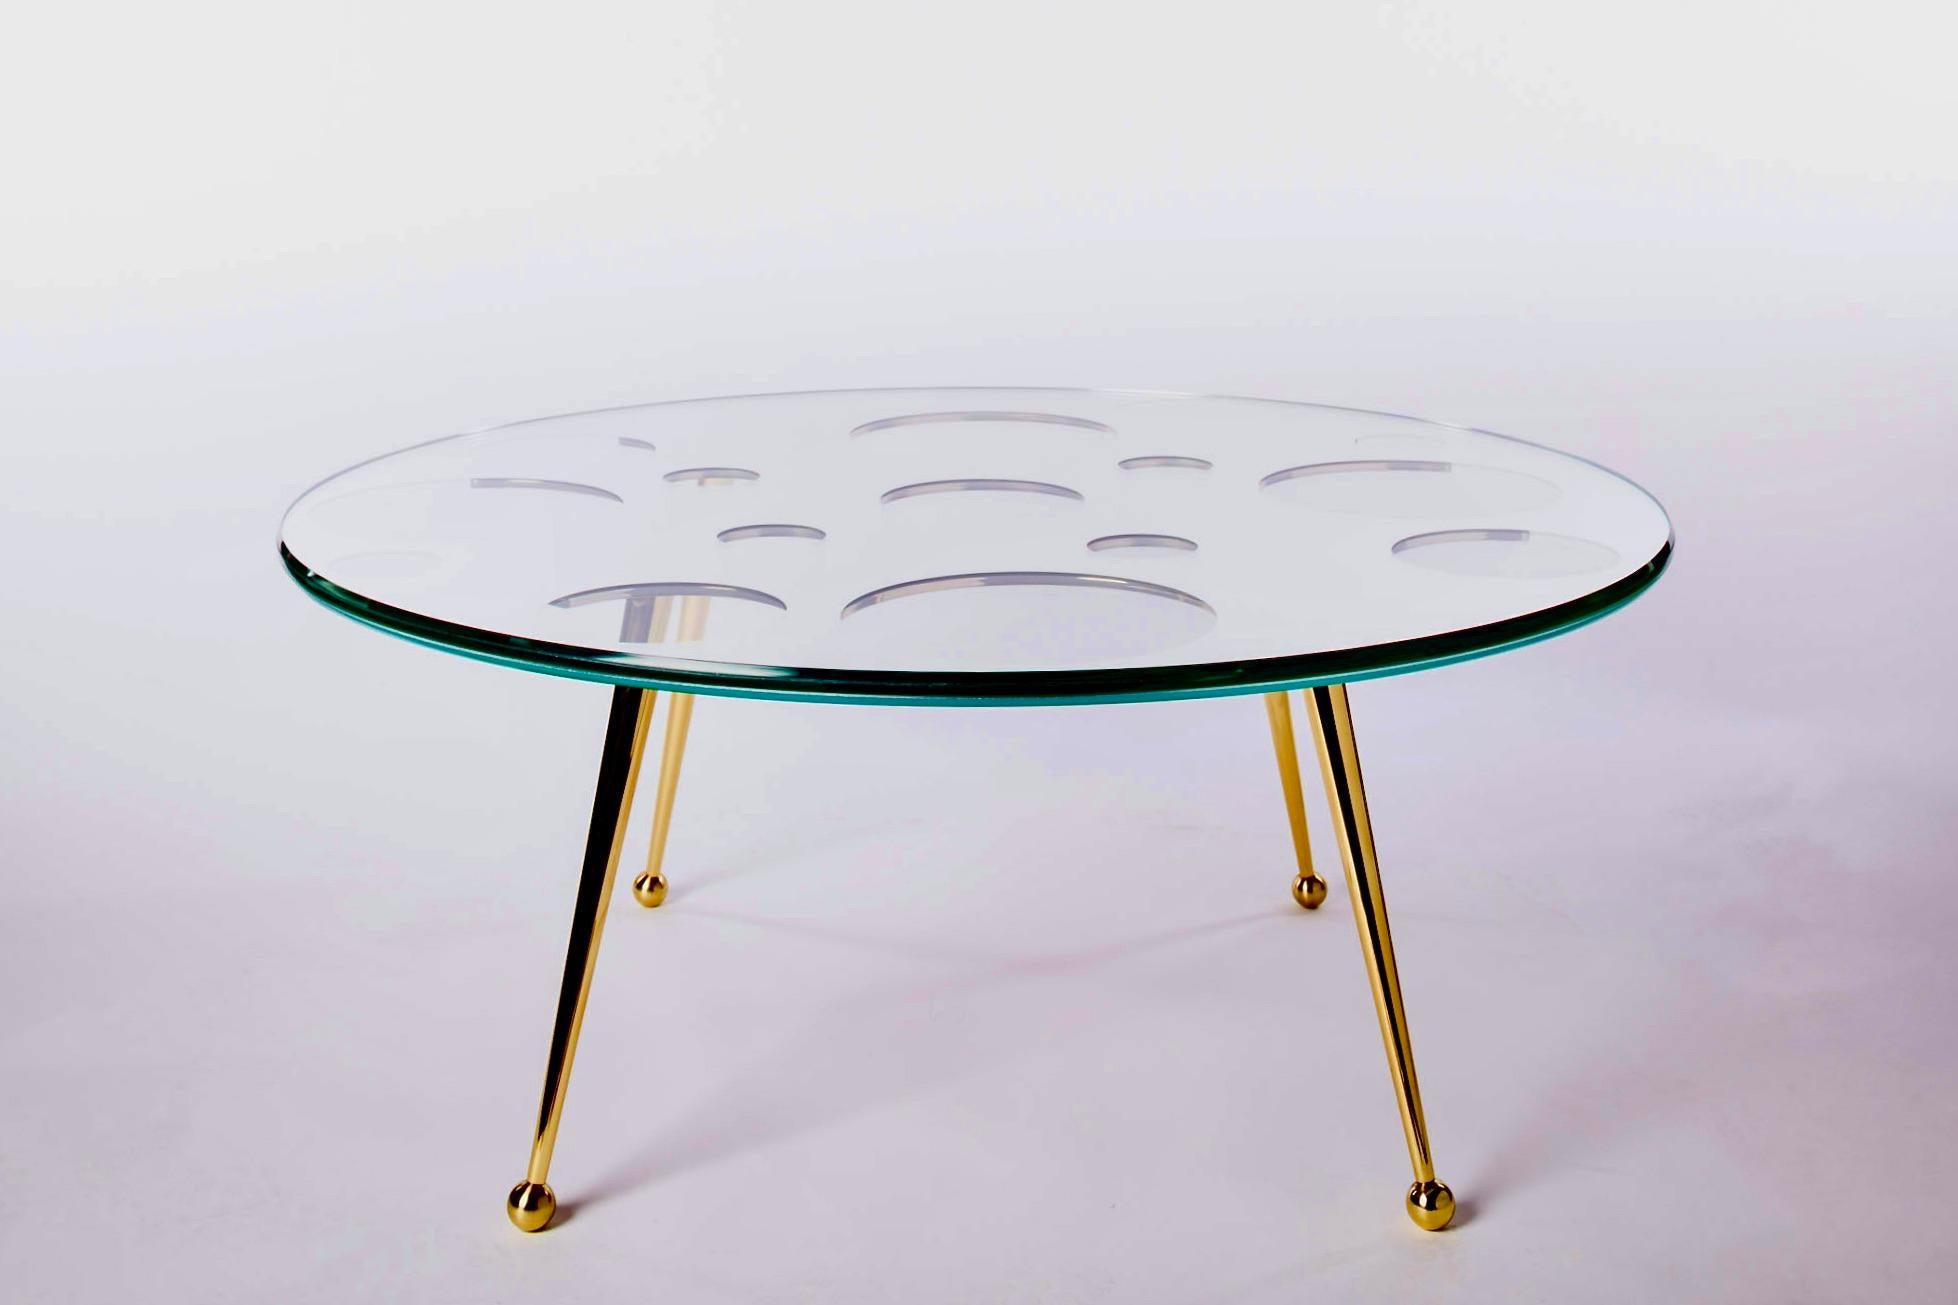 Glass & Mirror Topped Coffee Table With Polished Brass Legs In New Condition For Sale In Toronto, Ontario